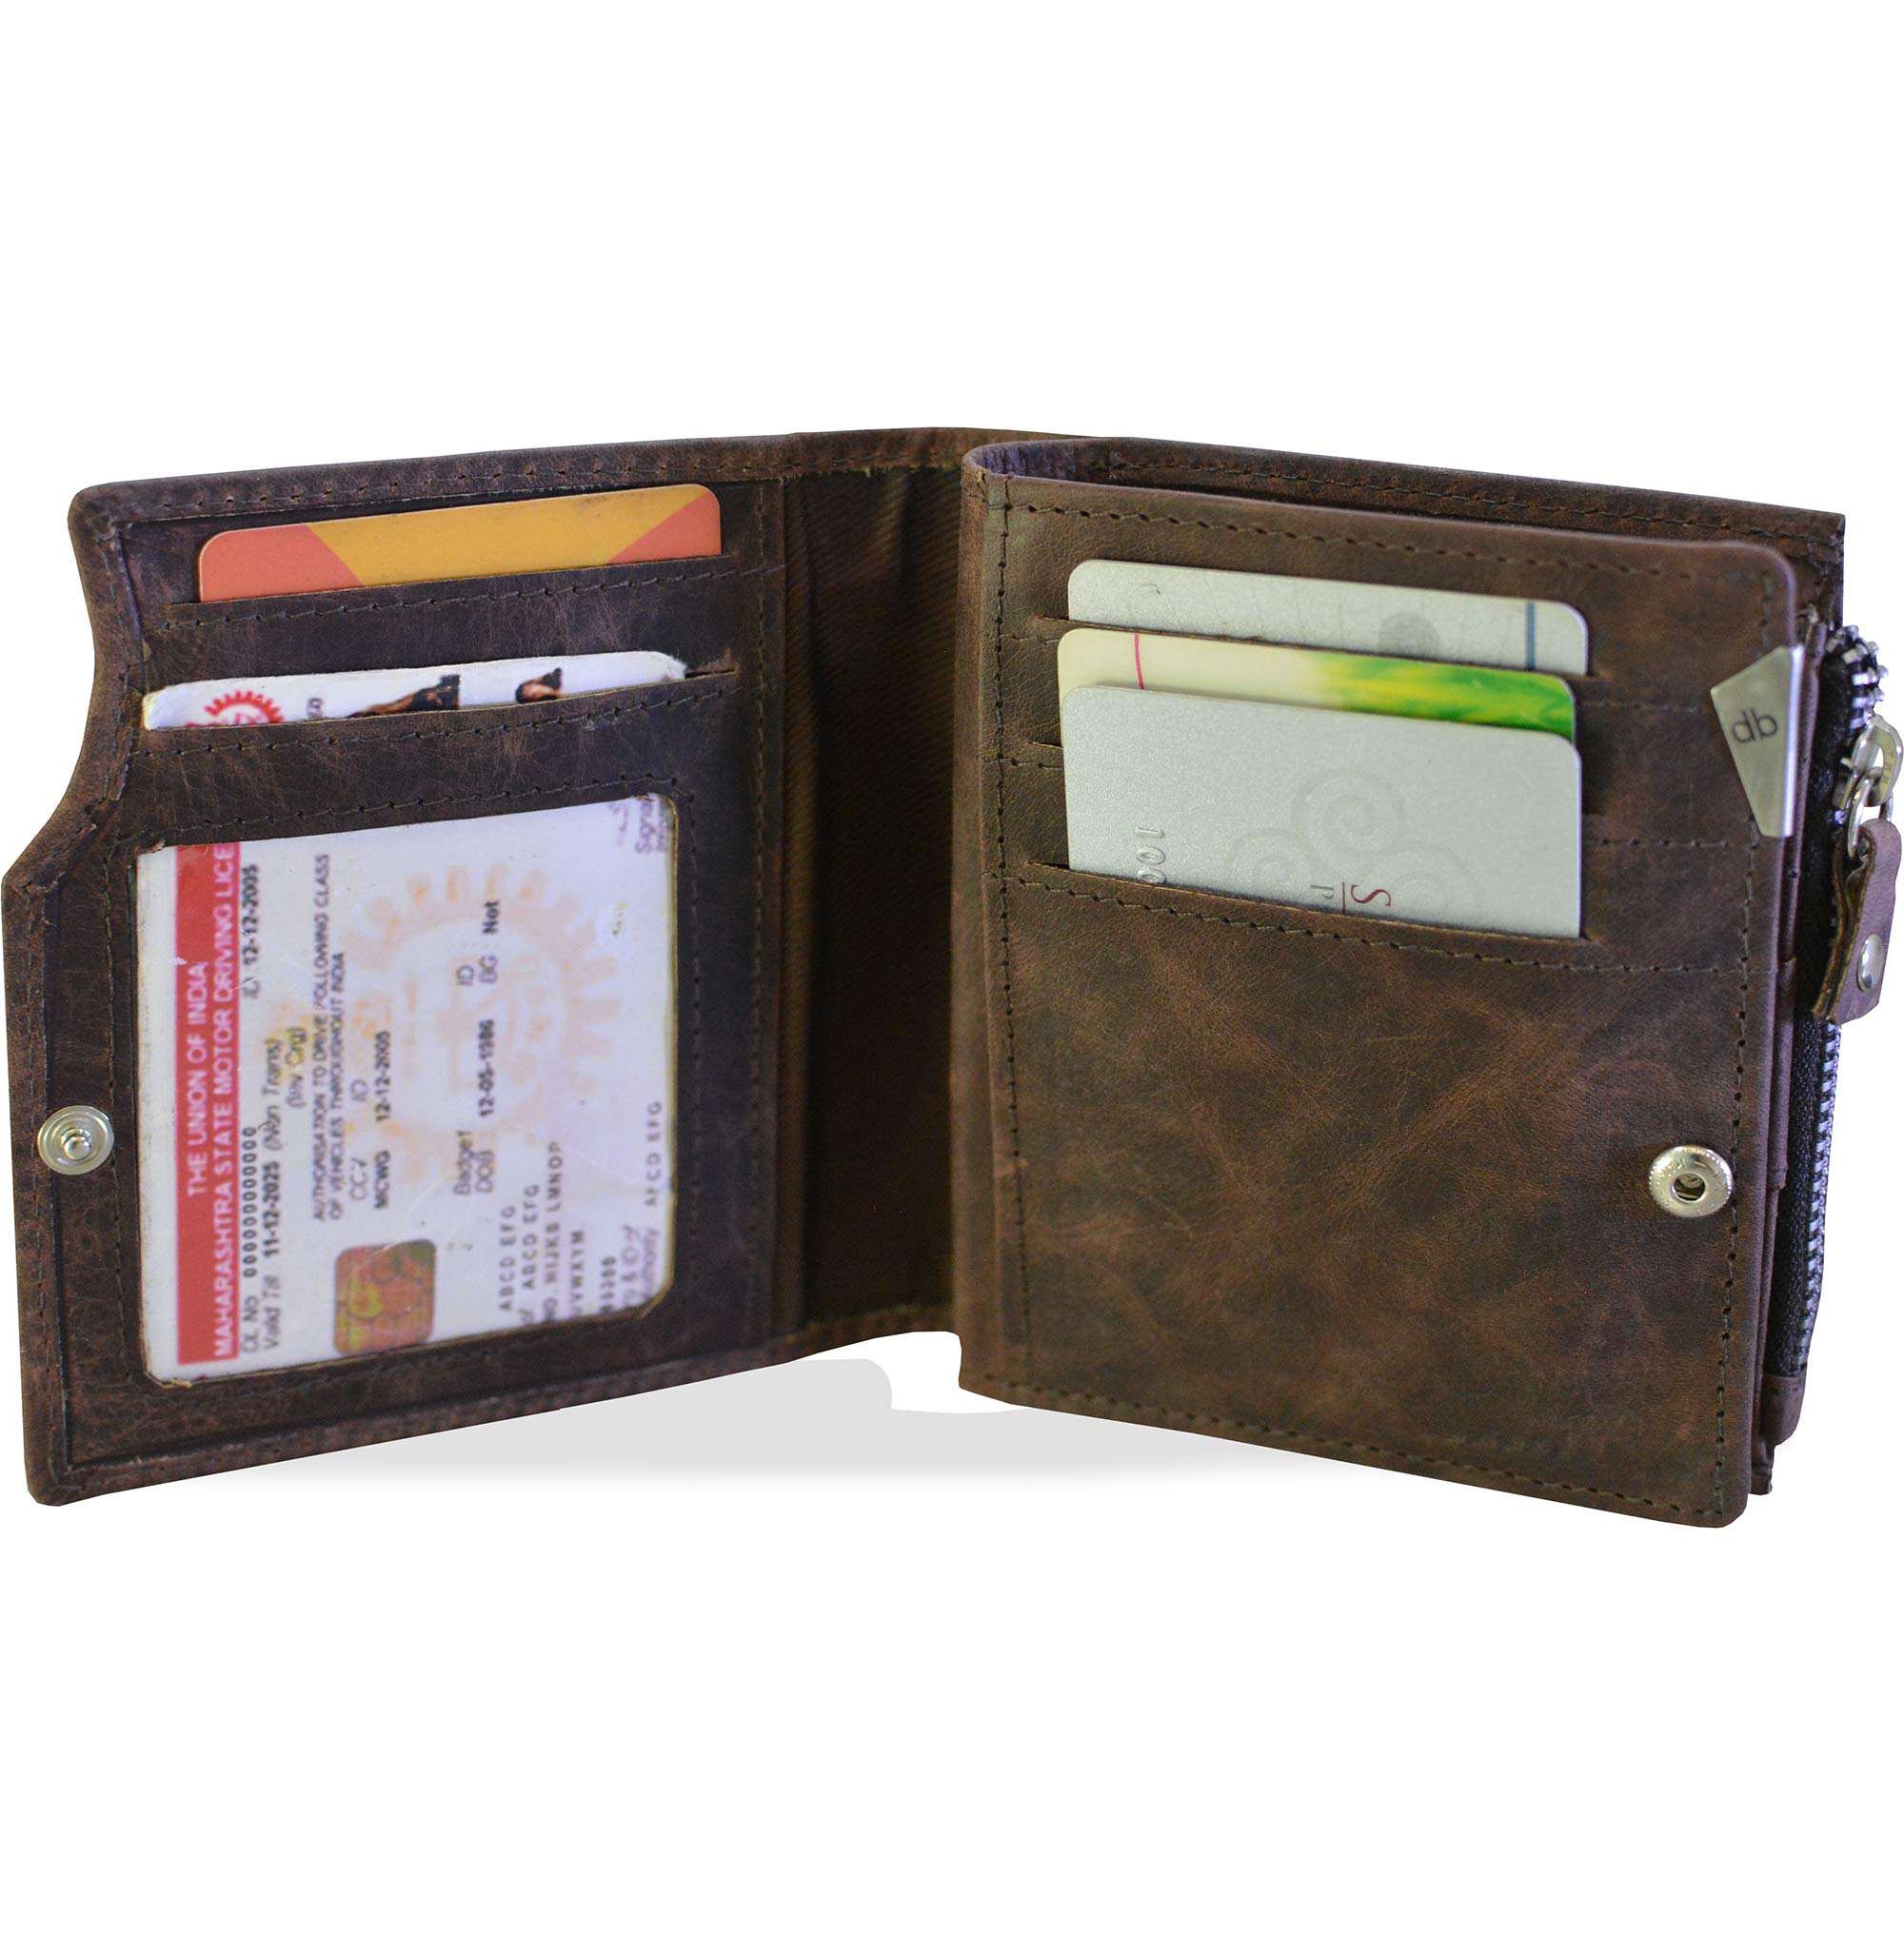 mypac cruise brown Genuine Leather wallet with atm card holder for men ...